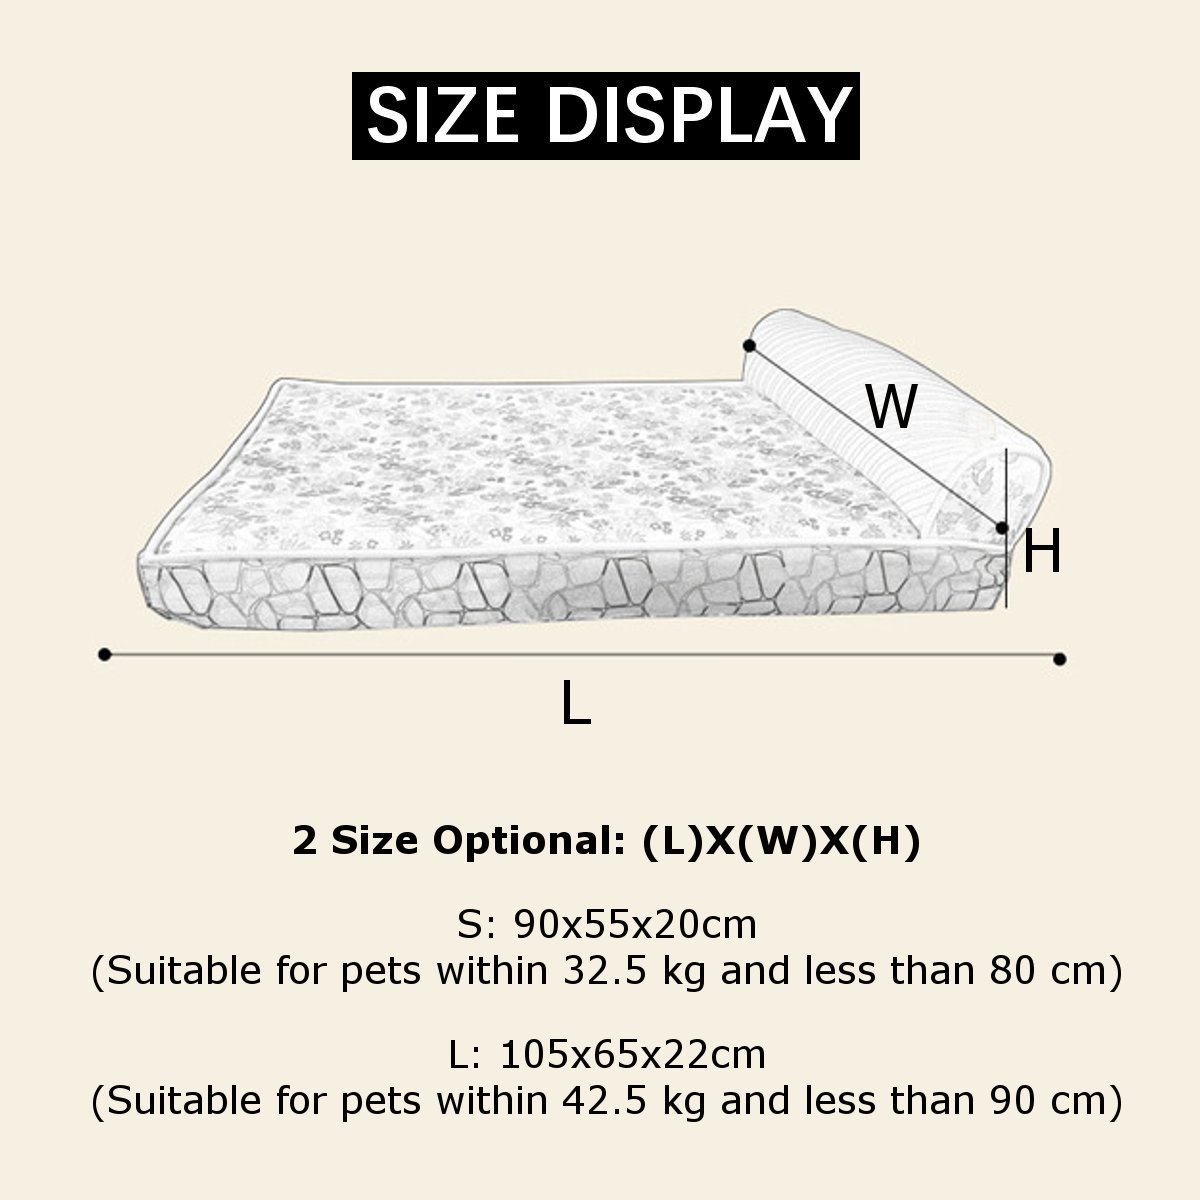 Sofa-Shape-Large-Dog-Bed-Multicolor-Soft-Waterproof-Pet-Sleeping-Bed-Mat-House-Kennels-1479299